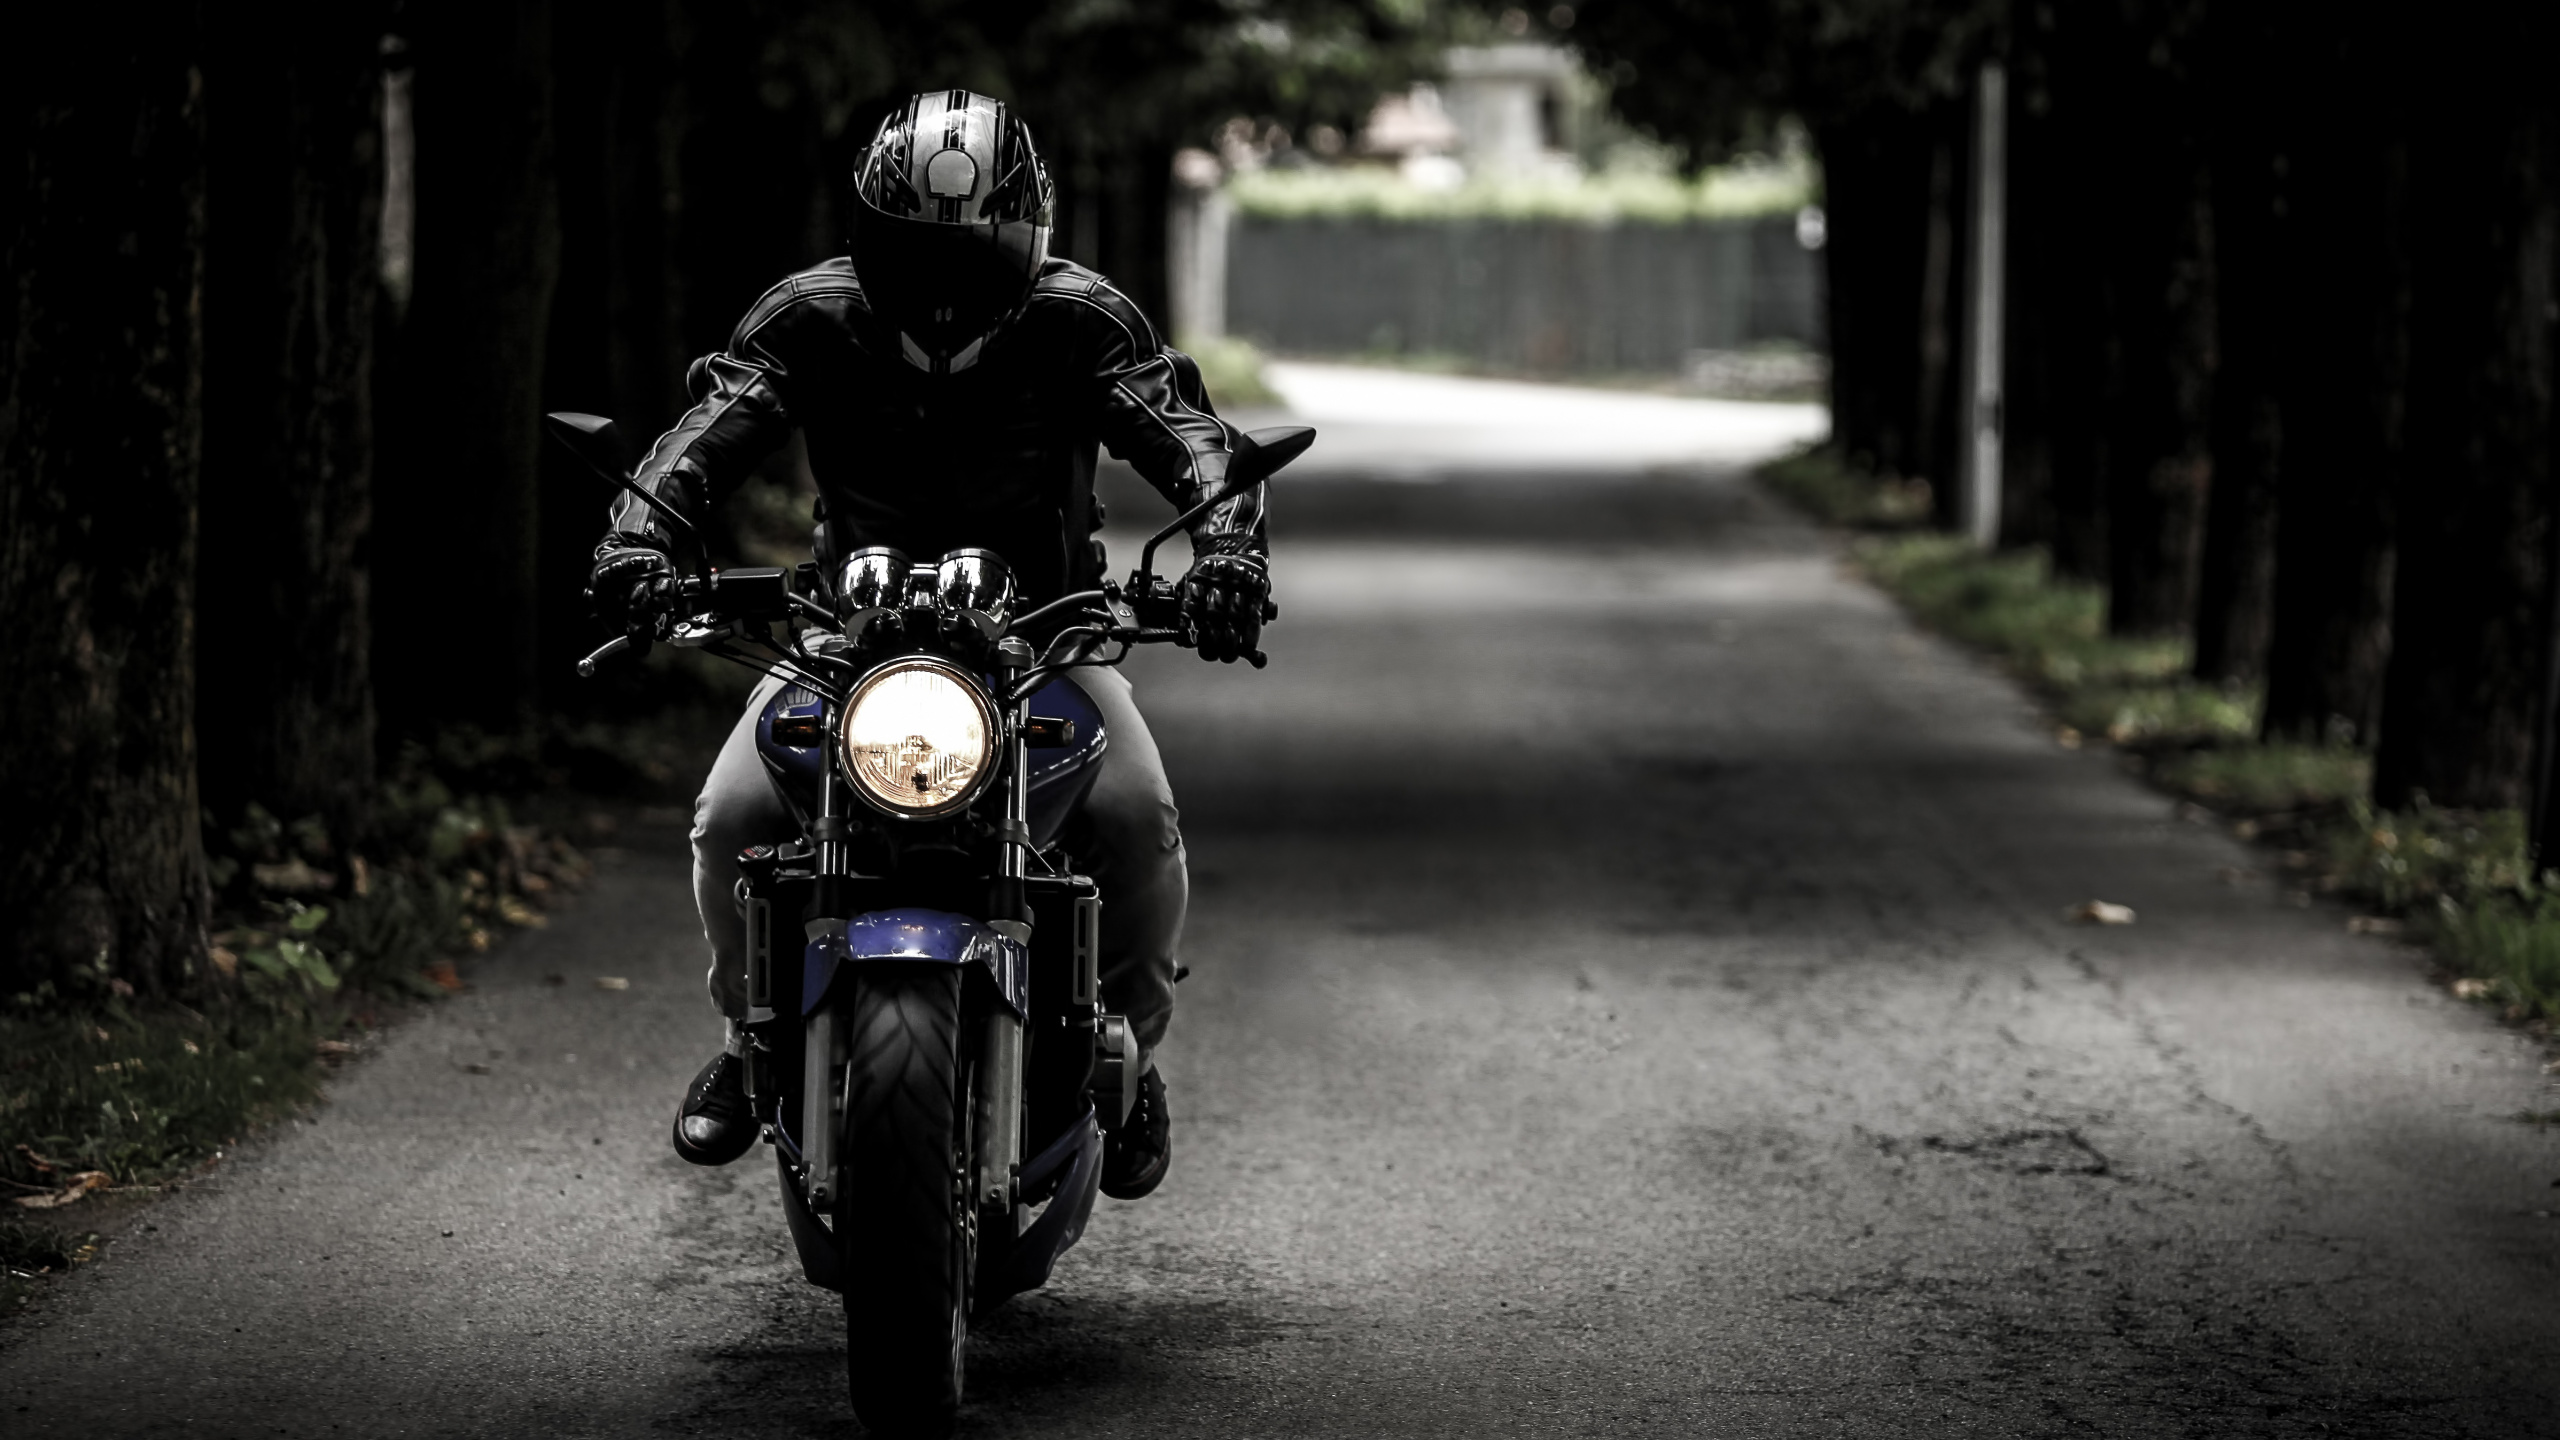 Man in Black Helmet Riding Motorcycle on Road During Daytime. Wallpaper in 2560x1440 Resolution